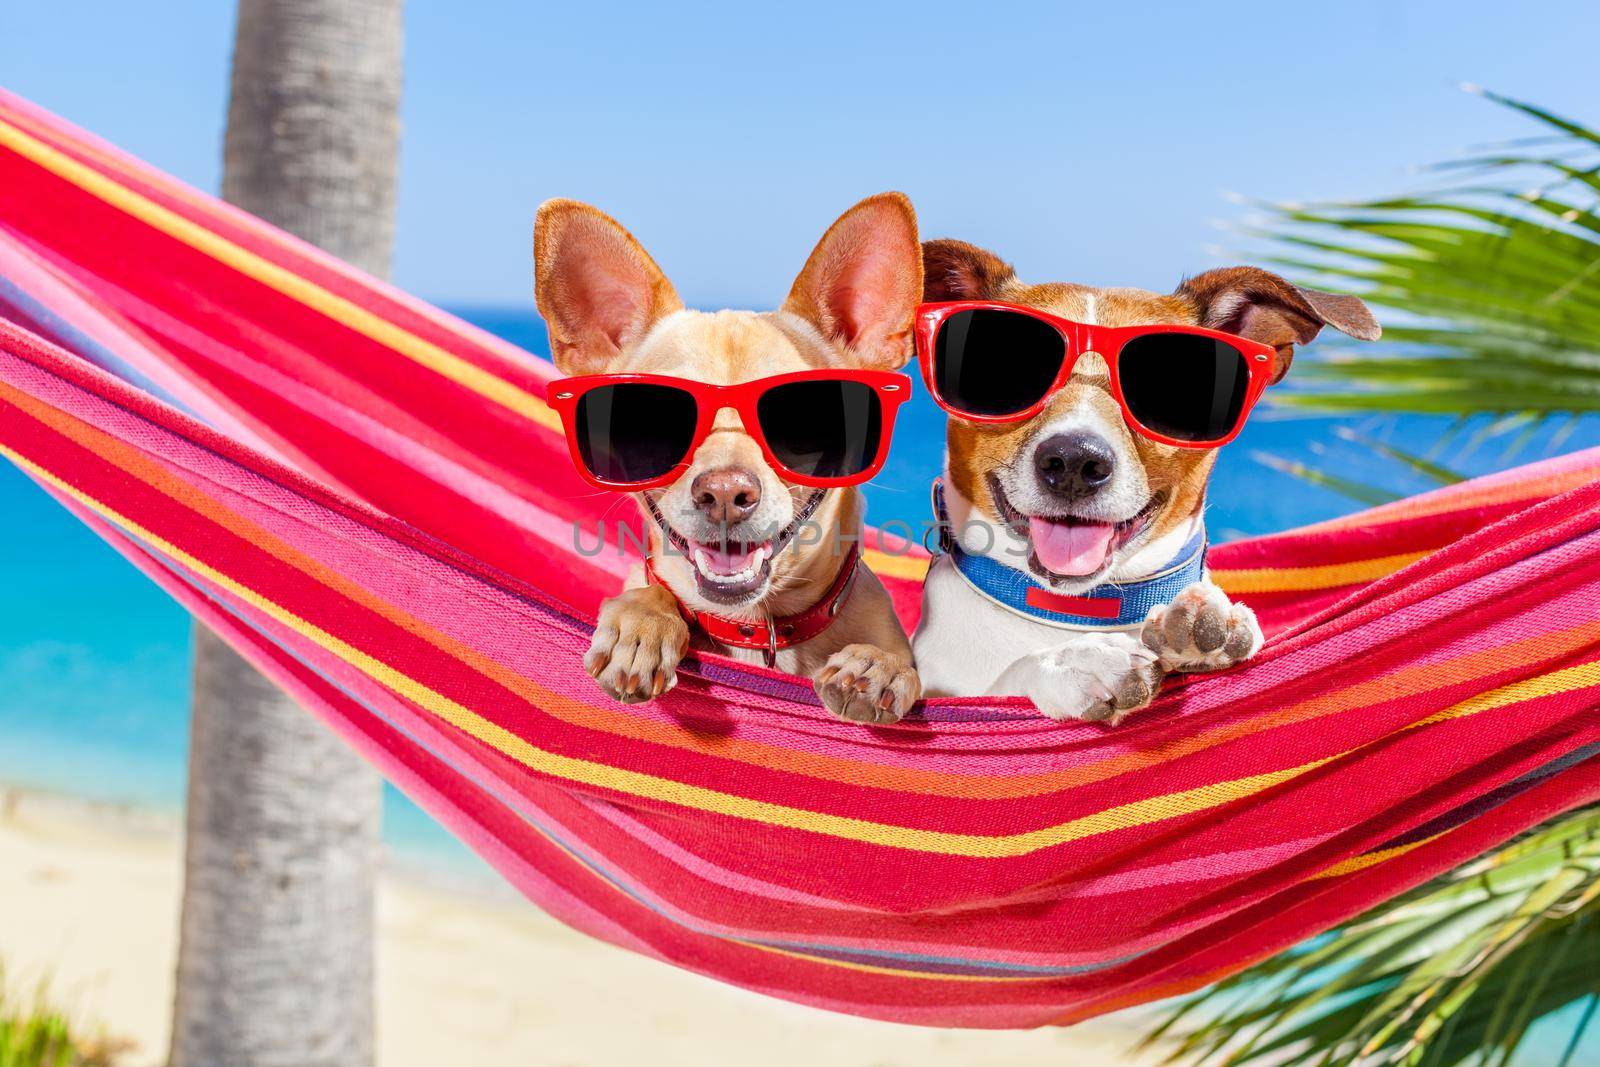 couple of two  dogs relaxing on a fancy red  hammock with sunglasses in summer vacation holidays at the beach under the palm tree